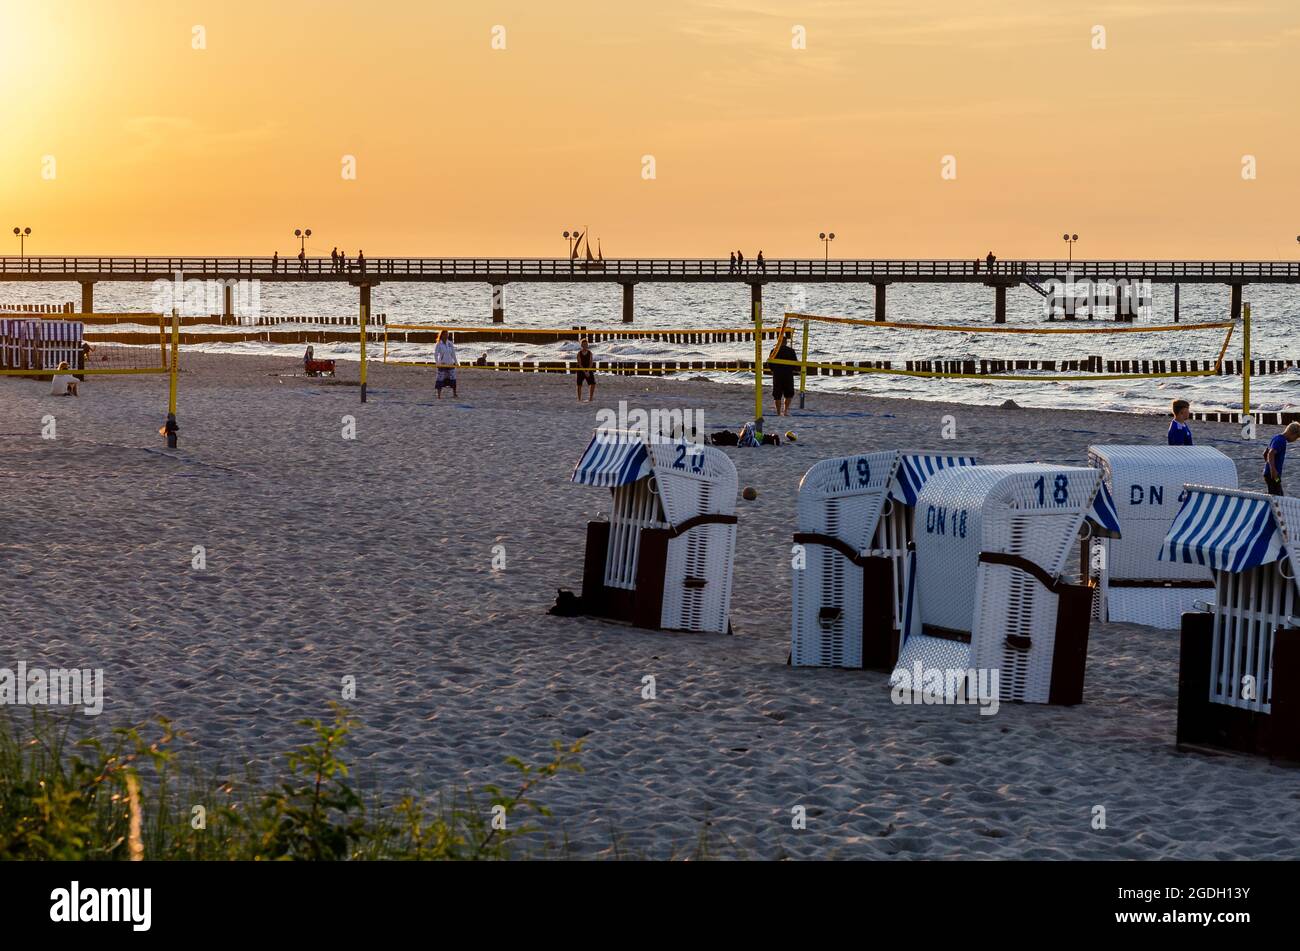 Kuehlungsborn, Germany, Baltic Sea coast: evening atmosphere and sunset at the beach and pier Stock Photo